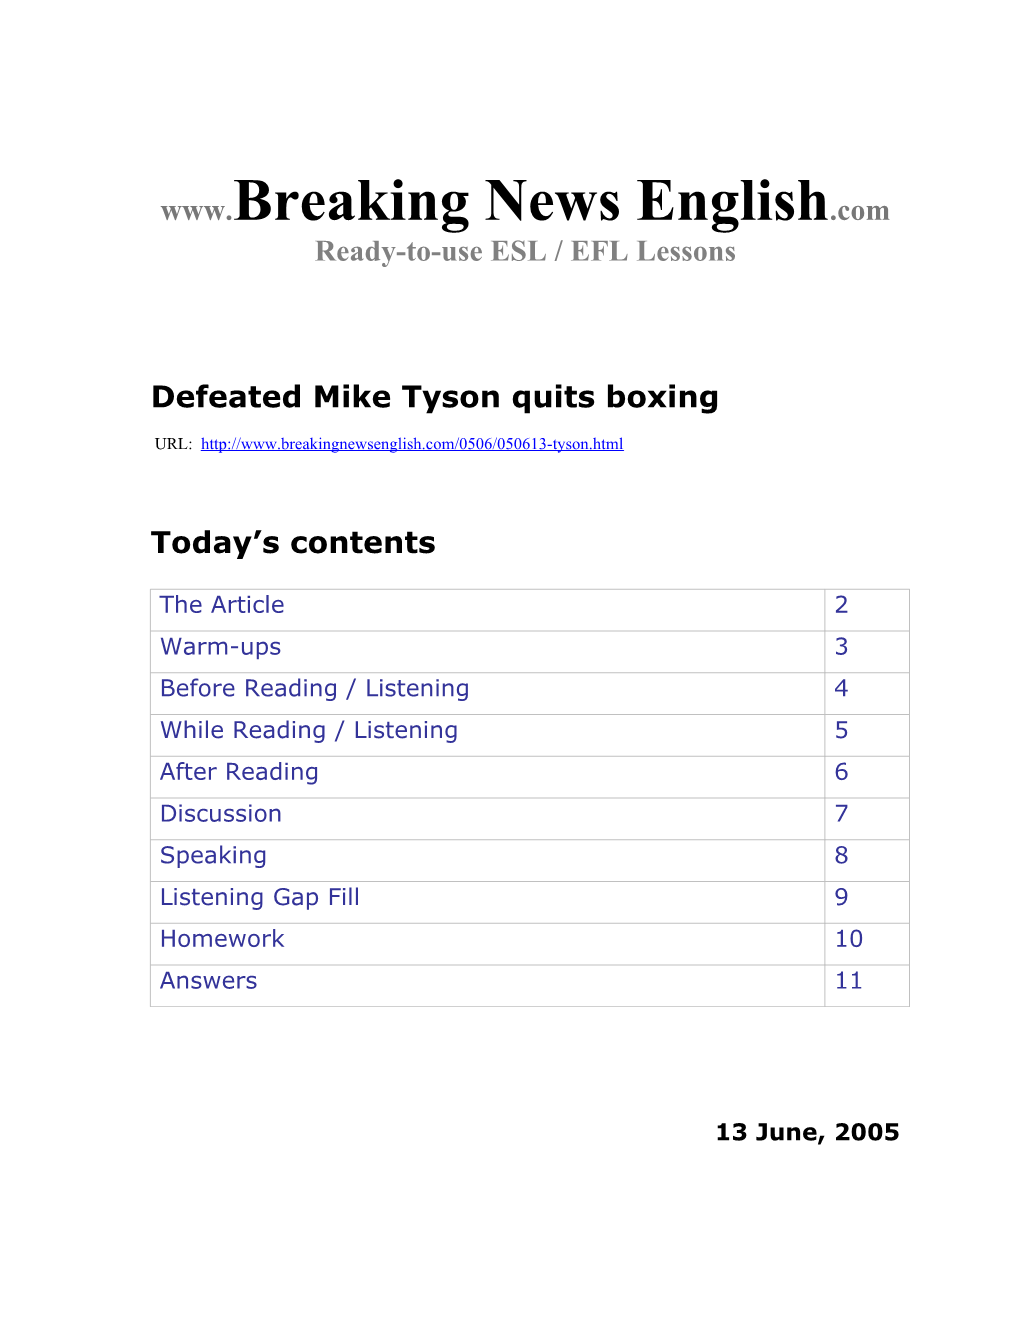 Defeated Mike Tyson Quits Boxing